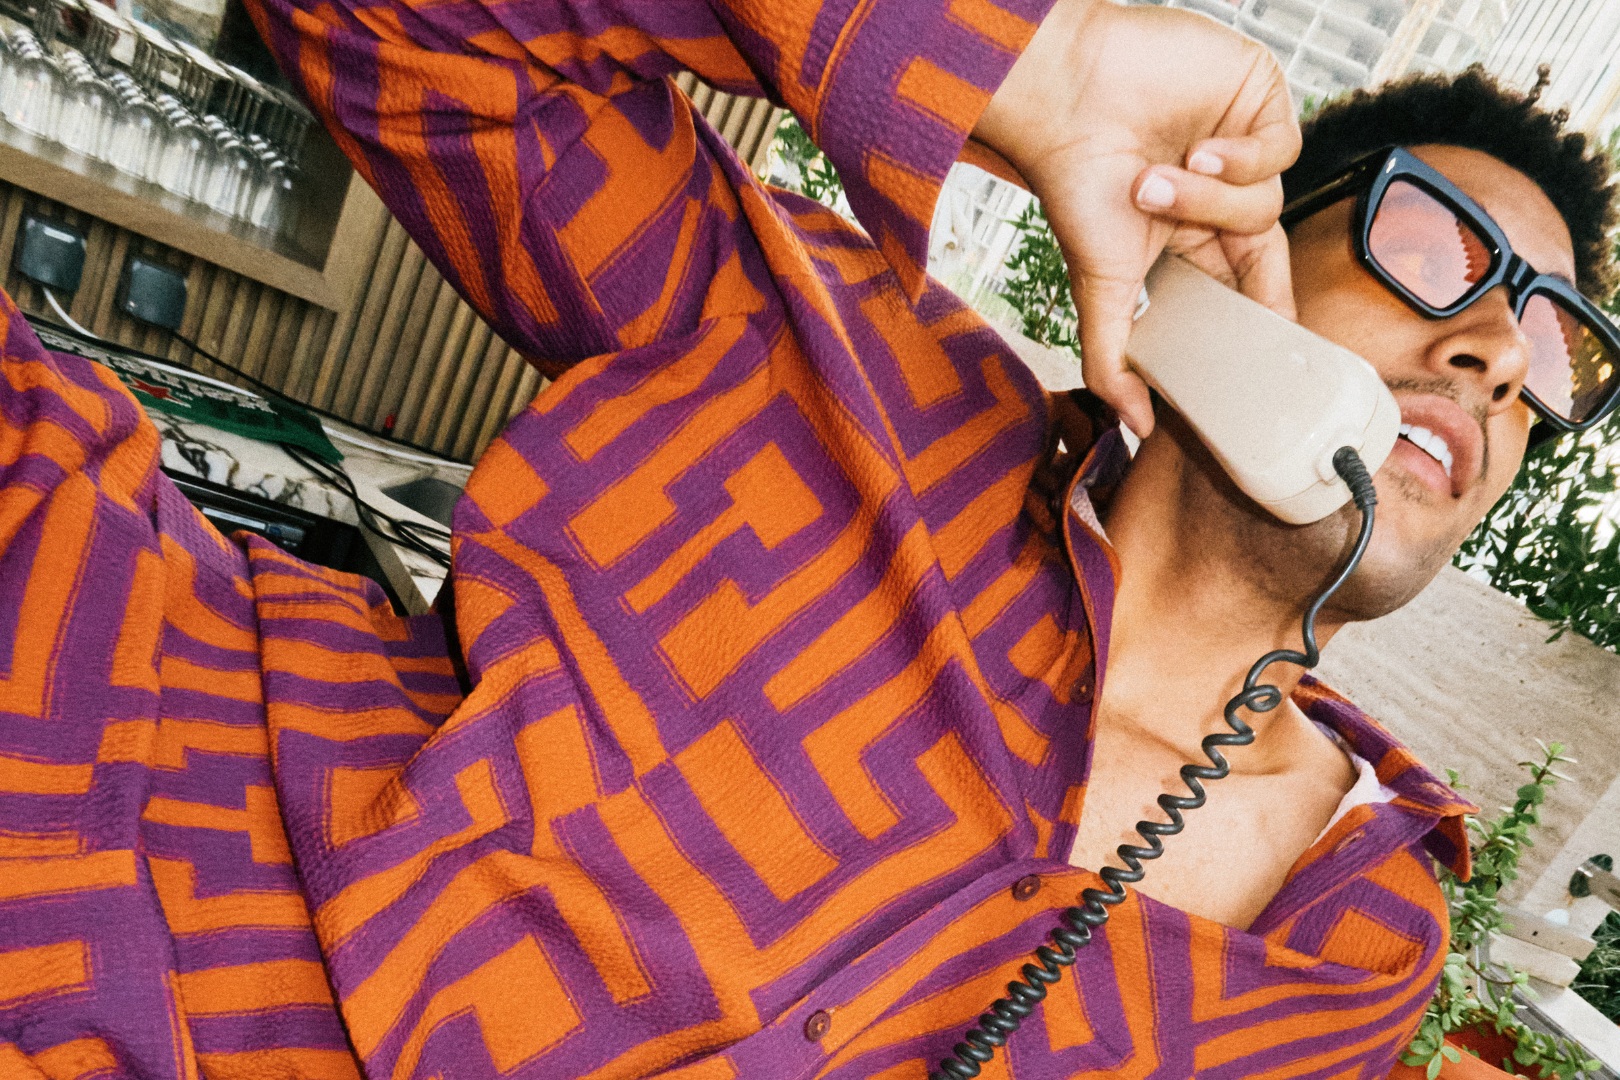 Man with curly hair in orange and purple patterned shirt puts a cord phone up to his ear